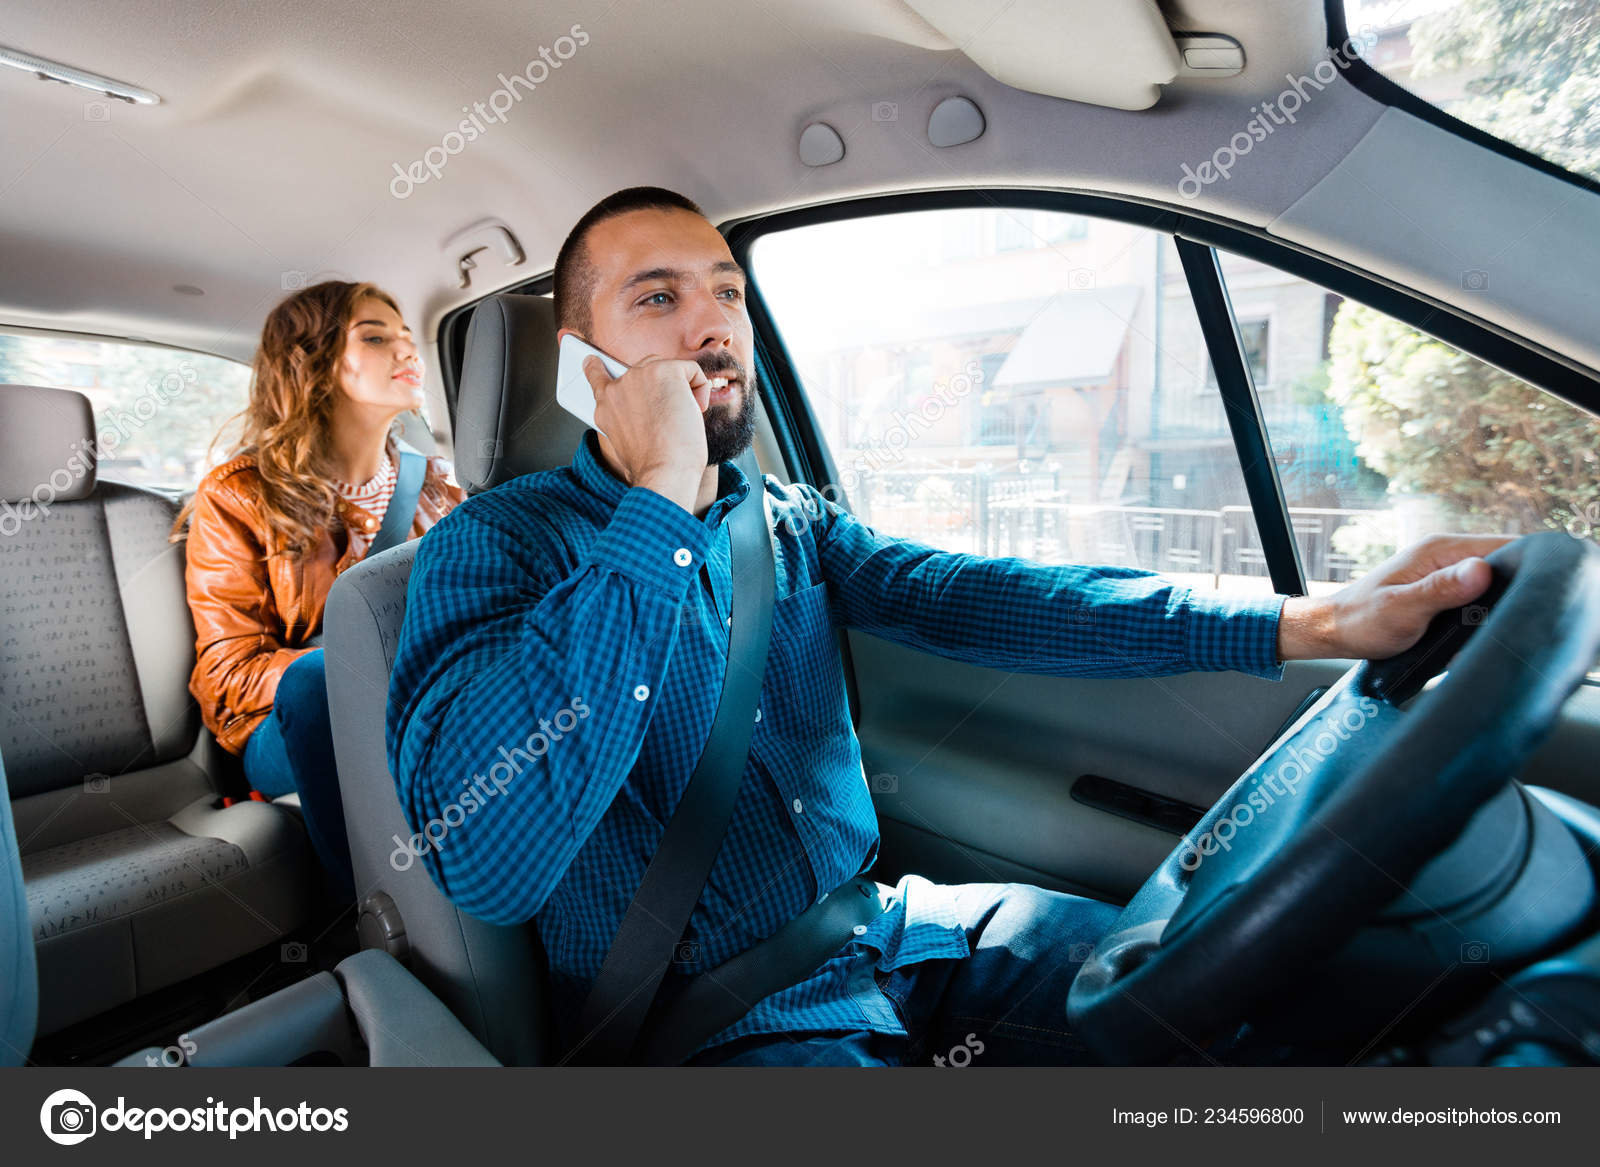 Taxi Driver Driving Car Talking Mobile Phone Woman Sitting Background Stock  Photo by © 234596800